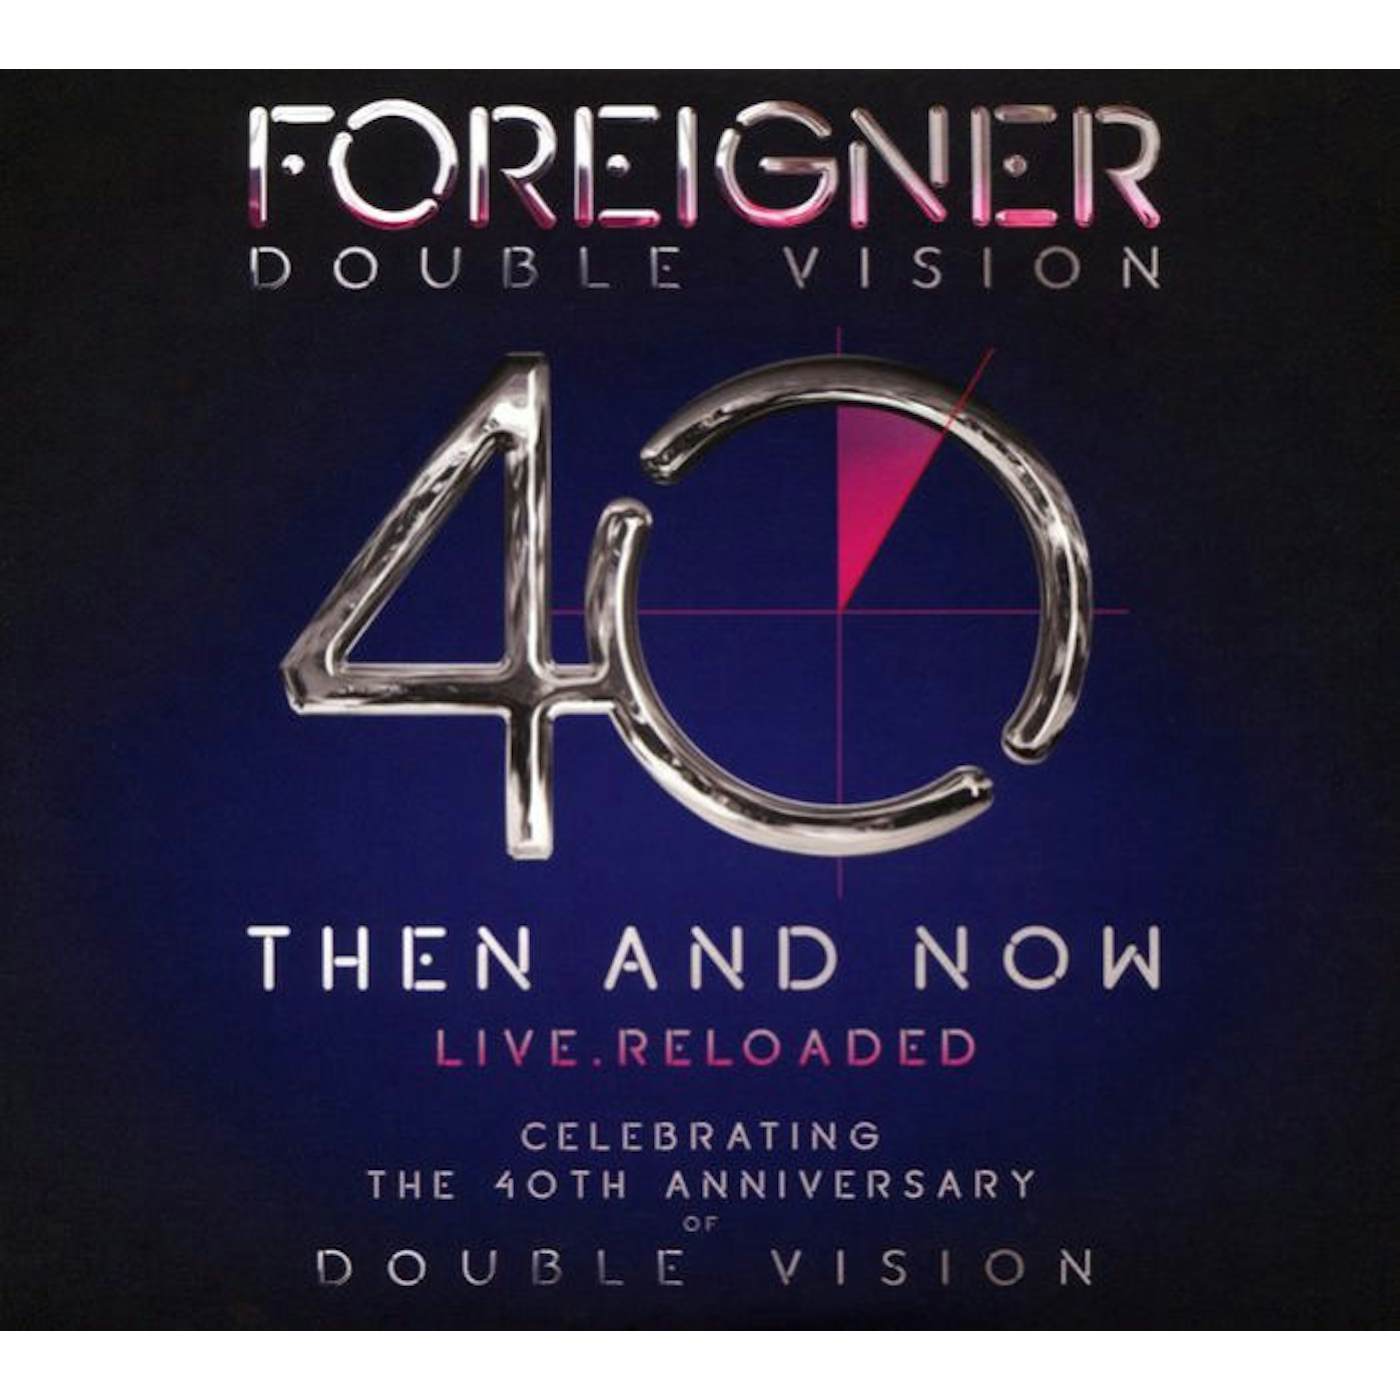 Foreigner - Double Vision: Then And Now Live